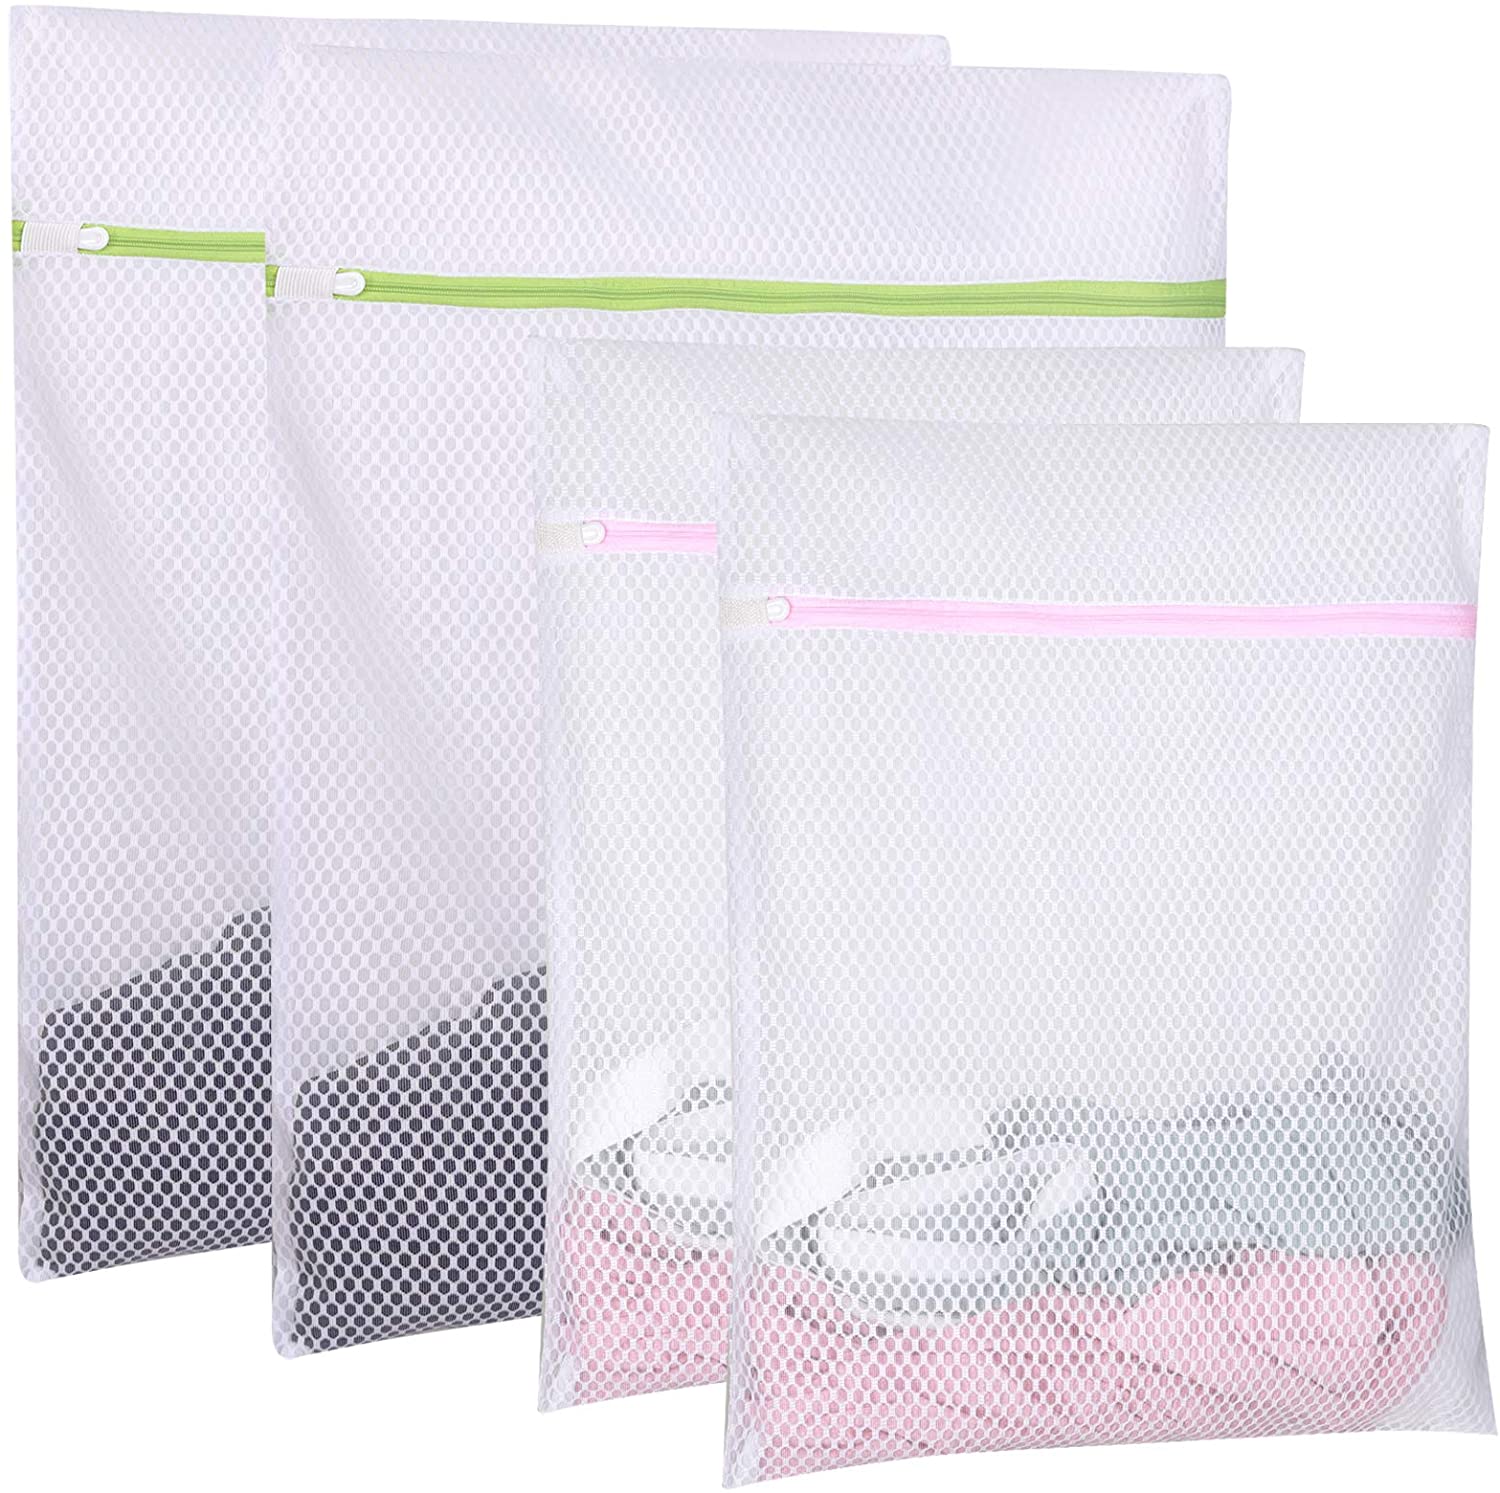 Mesh Laundry Bags with Zipper 2Pcs,Delicates Lingerie Wash Bags for Laundry,  Travel Storage Organize,Clothing Washing Bags for Blouse, Hosiery, Sock,  Underwear, Bra and Lingerie 